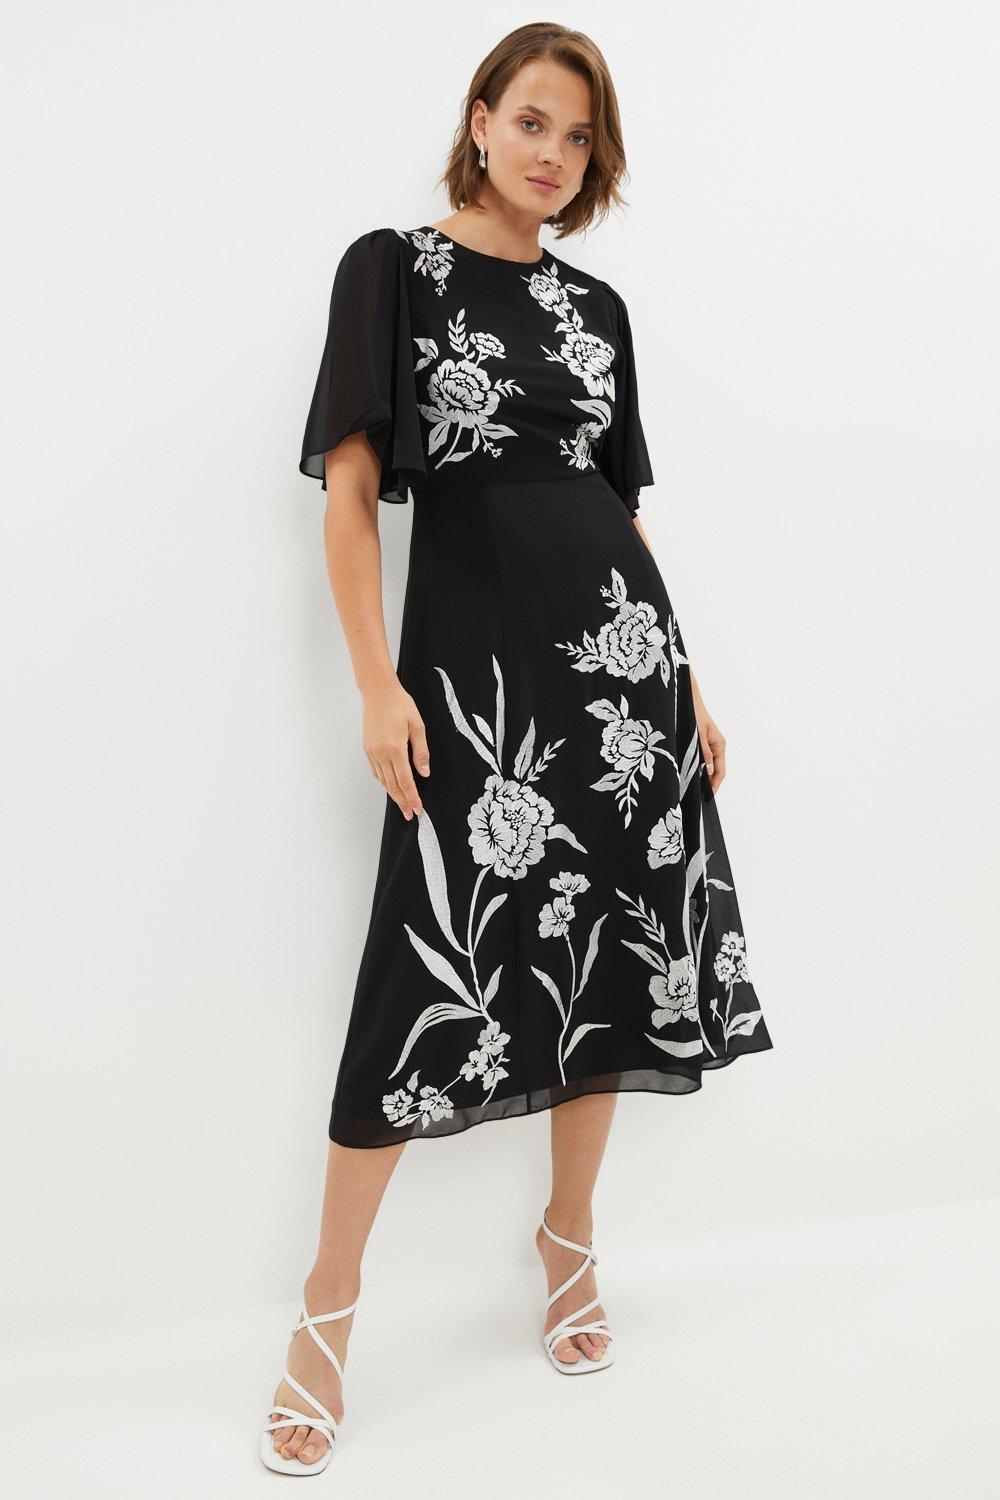 Coast Multi Multi Party Embroidered Floral Cocktail Midi Dress SIZE 6 To 18 £169 